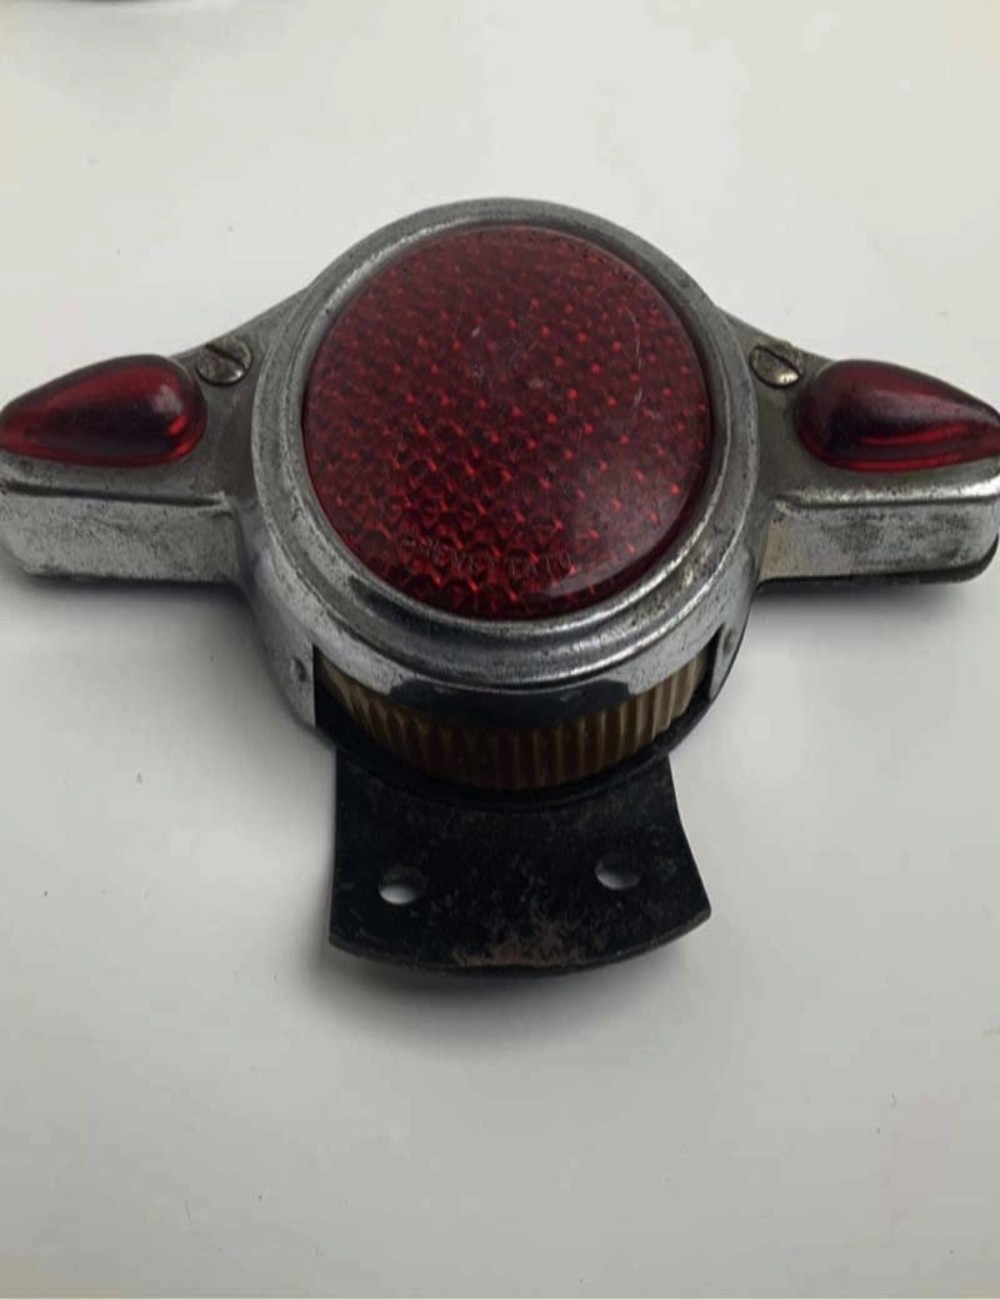 Light accessory for motorcycles and wasps